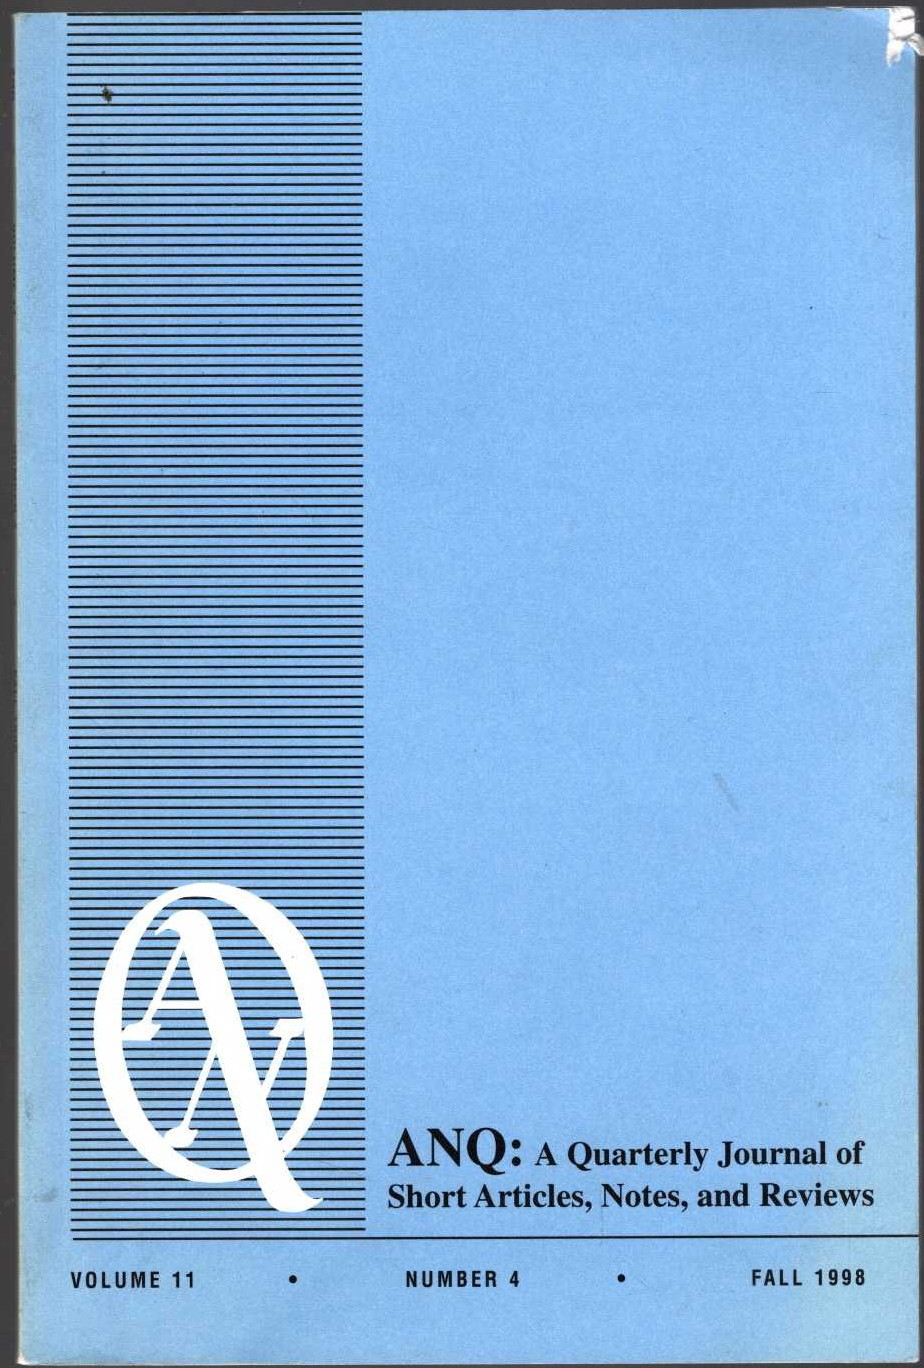 Various   ANQ: A QUARTERLY JOURNAL OF SHORT ARTICLES, NOTES, AND REVIEWS. Volume 11. Number 4. Fall 1998 front book cover image